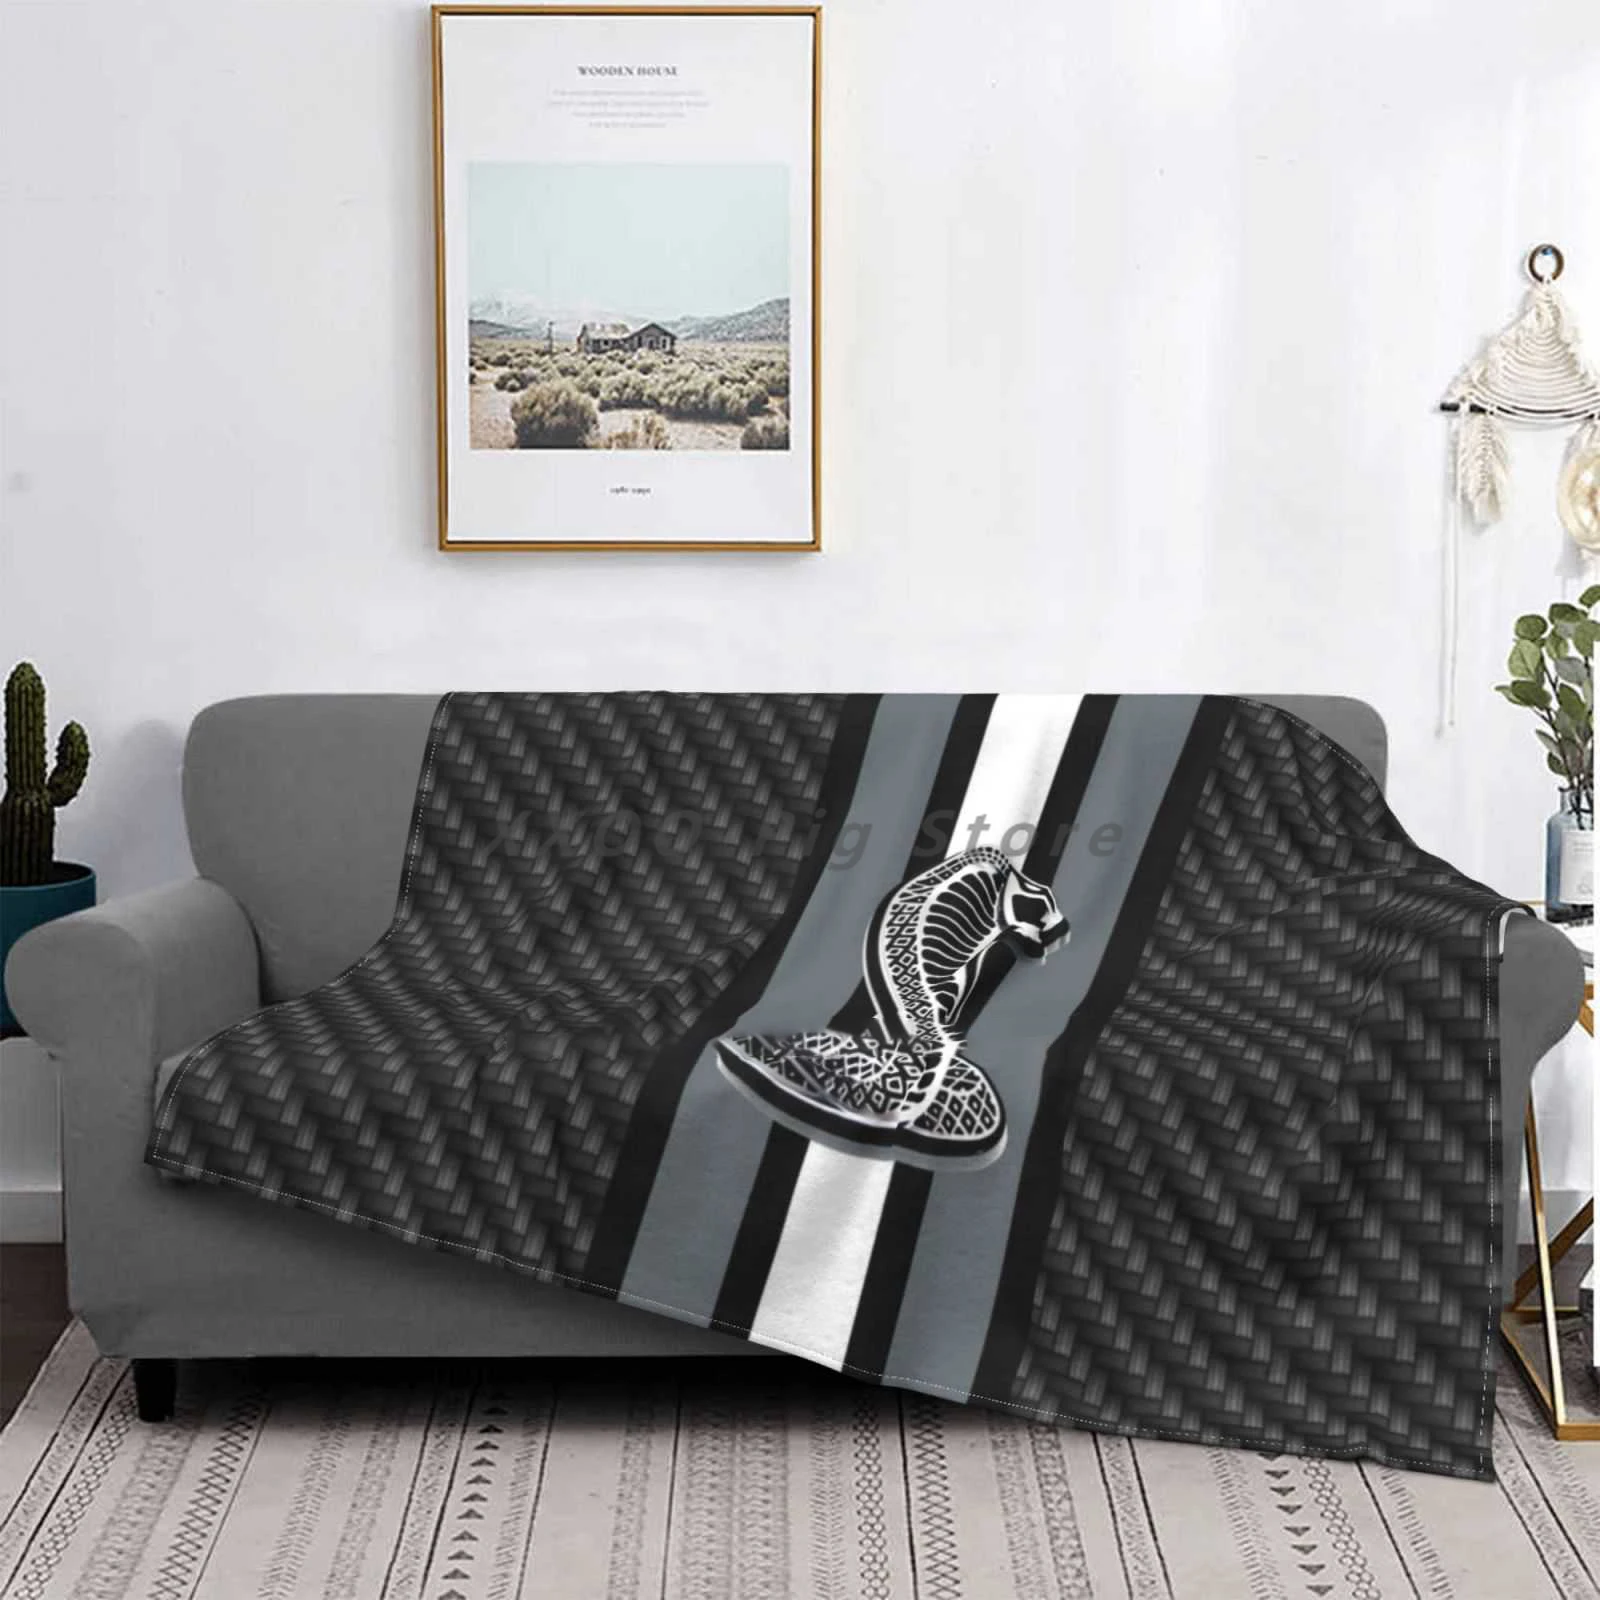 

Ford Shelby Inspired Classy Hot Sale Printing High Qiality Flannel Blanket Cars Modern Snake Unique Shelby